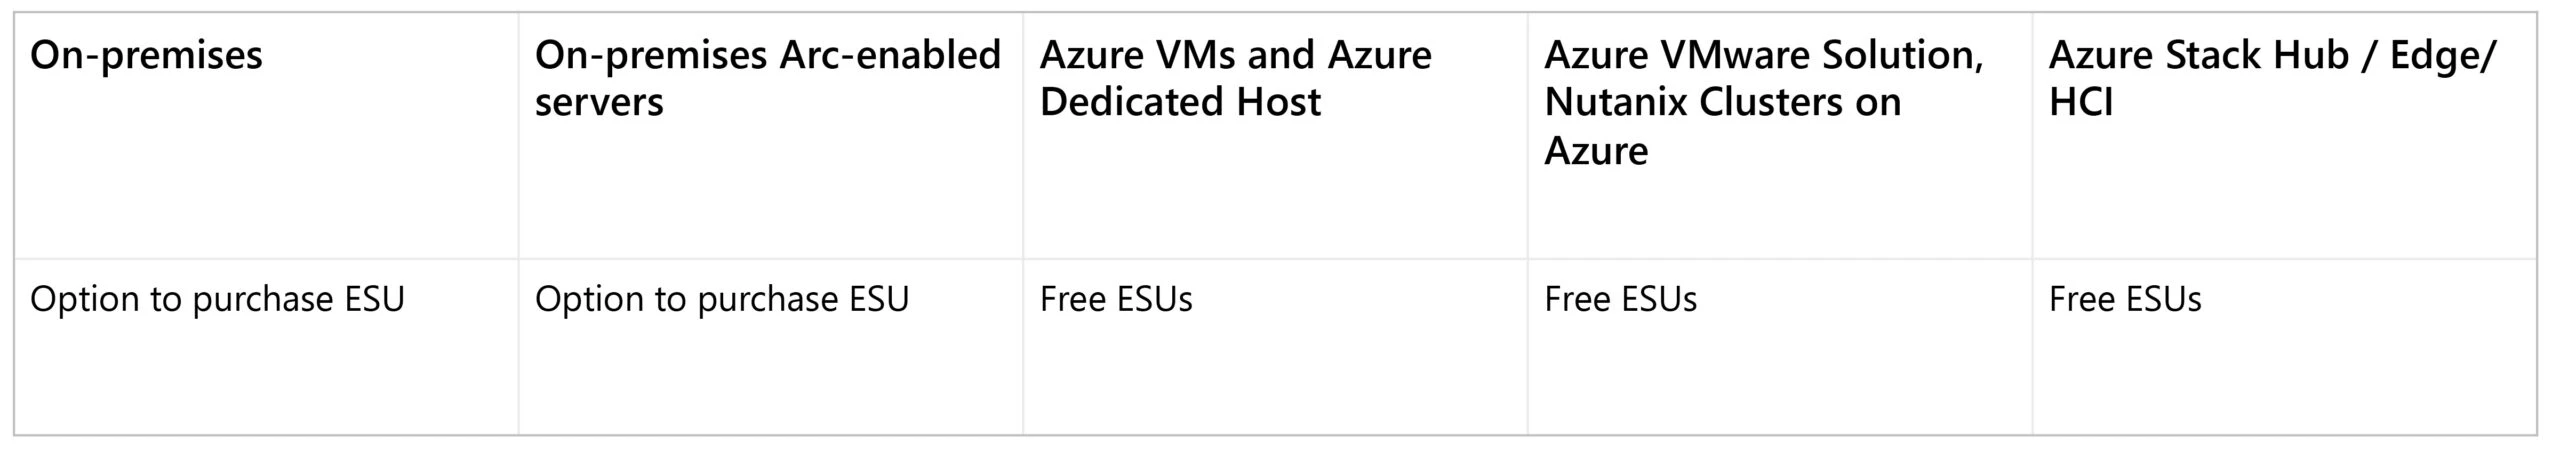 From left to right: Not moving your SQL Server to Azure Virtual Machines is still possible, however you will have to purchase three more years of Extended Security Updates On premises & On Premises-Arc enabled servers. If you decide to move SQL Server to Azure Virtual Machines, you will receive the Free Extended Security updates for Azure VMs and Azure Dedicated Host, Azure VMware Solution Nutanix Clusters on Azure and on Azure Stack Hub, Edge, HCI.